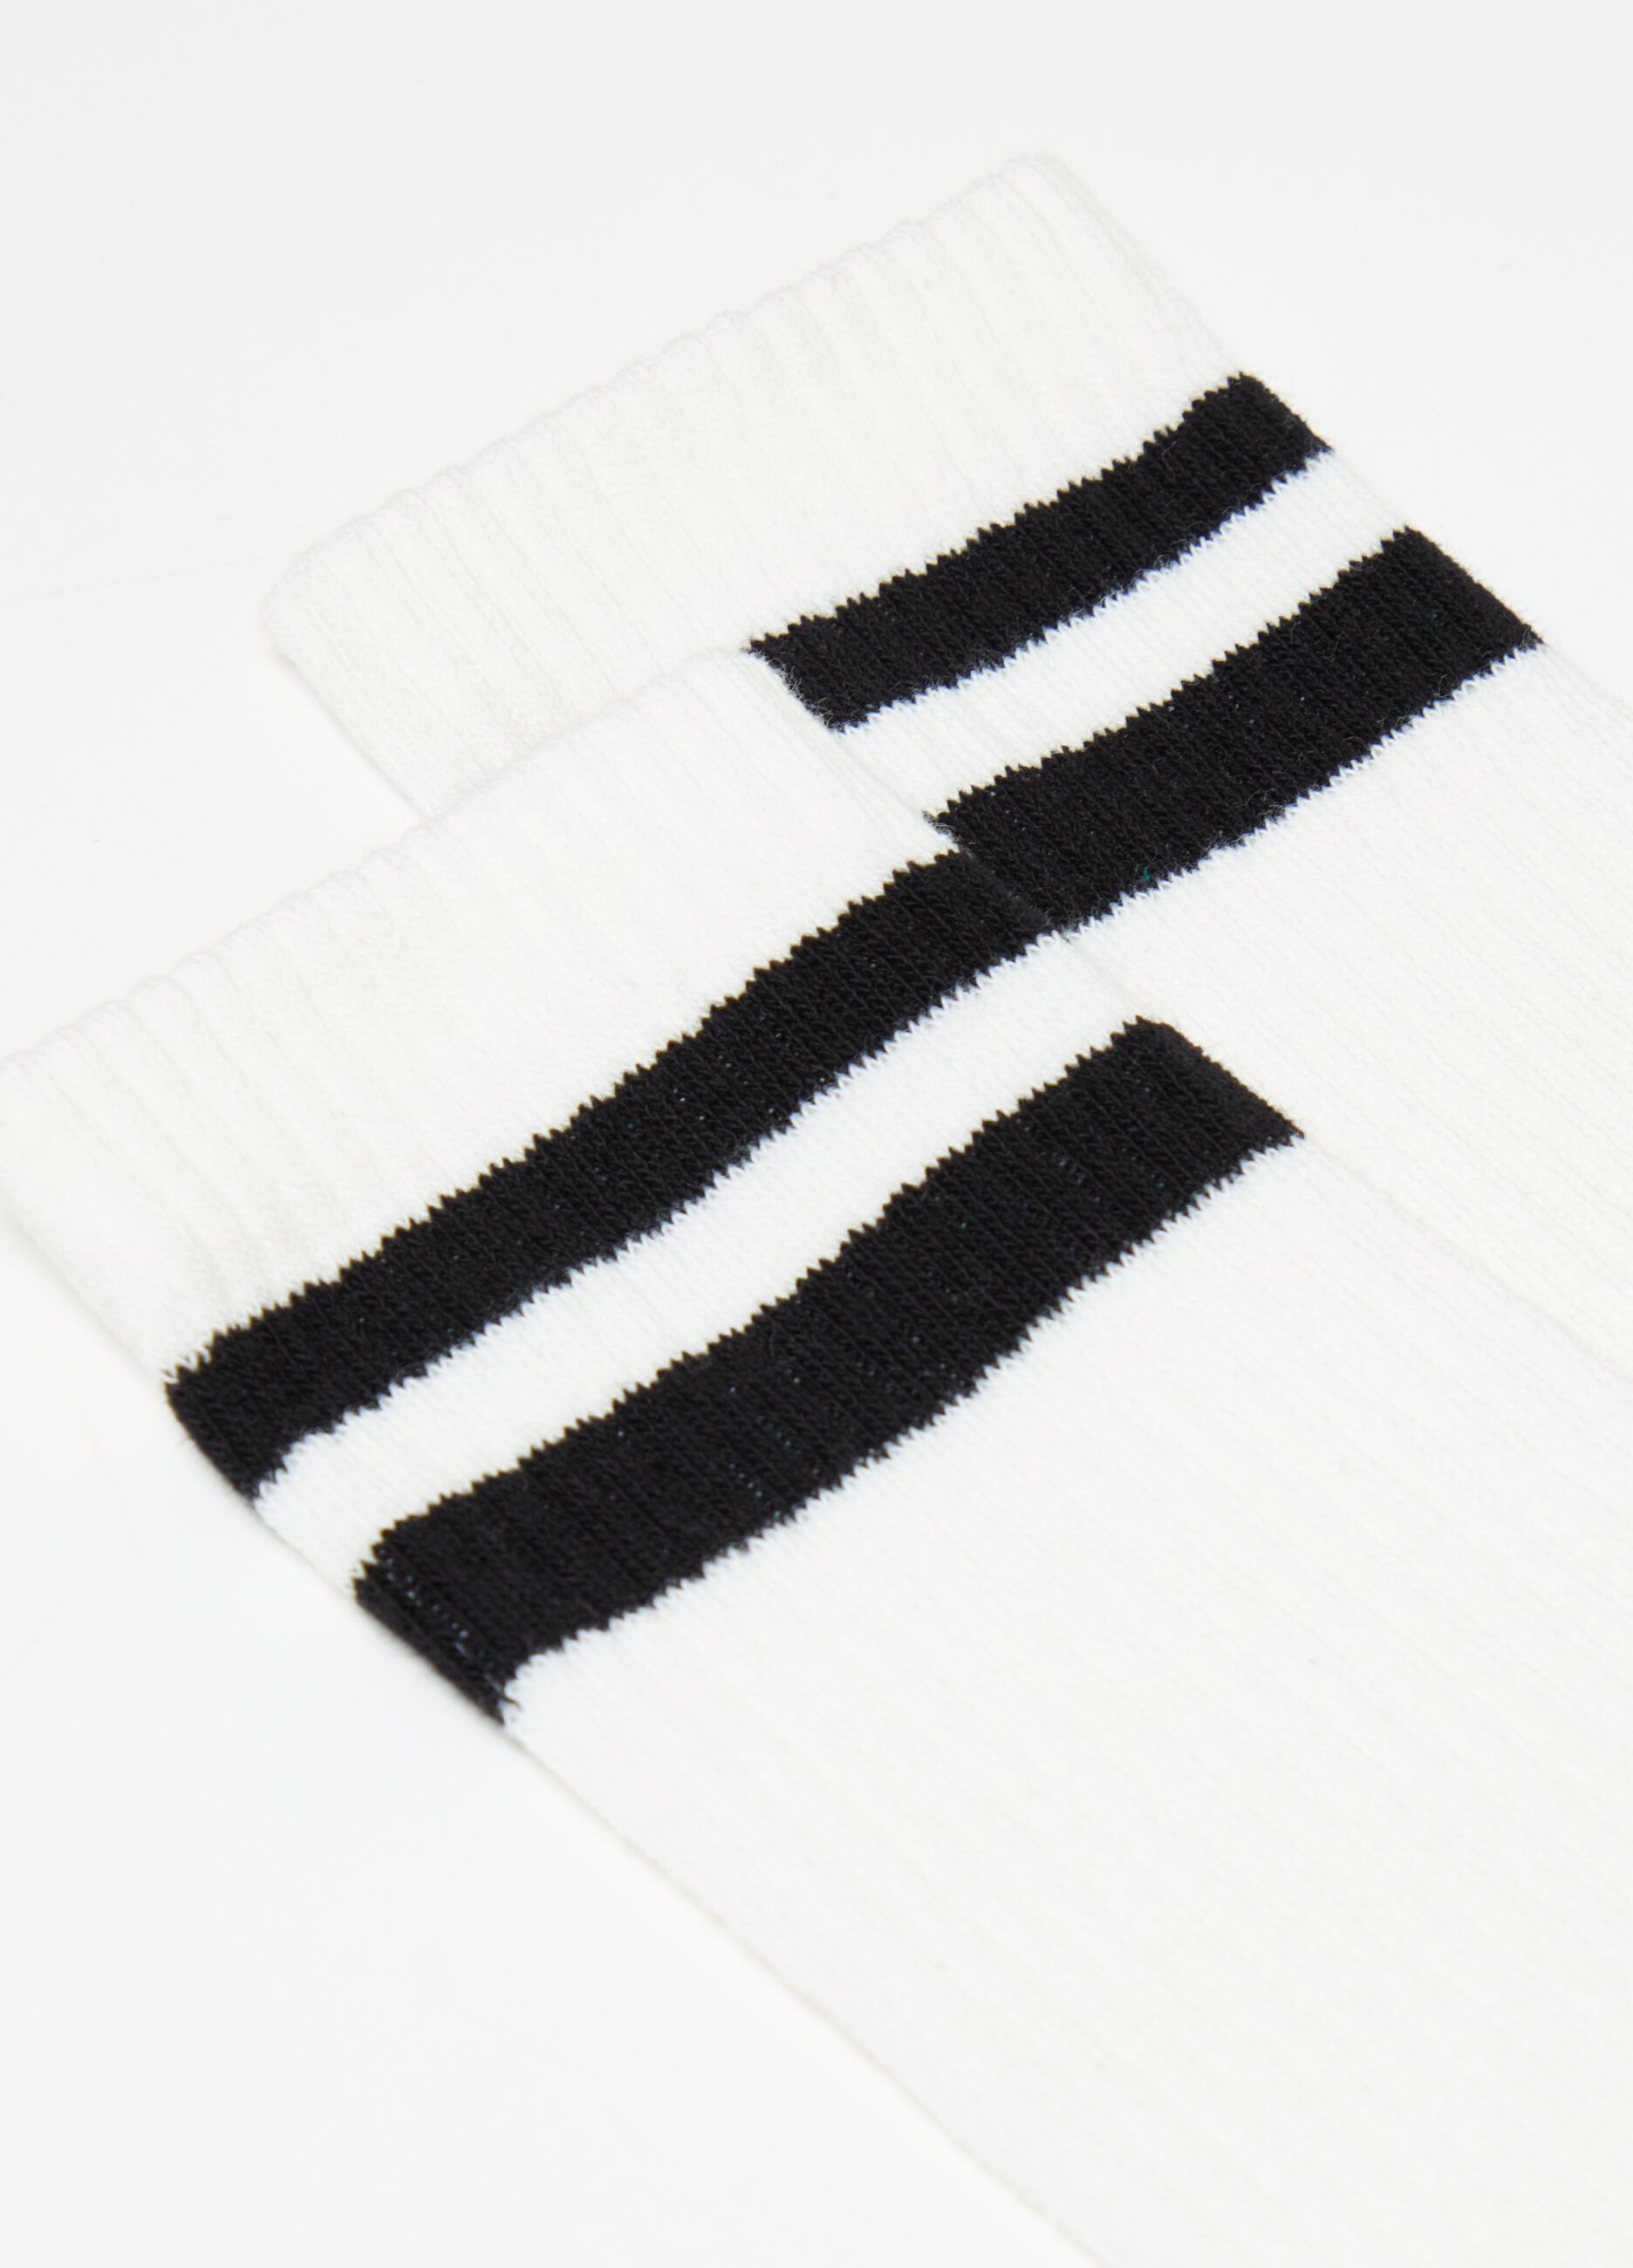 Chunky socks with striped detail